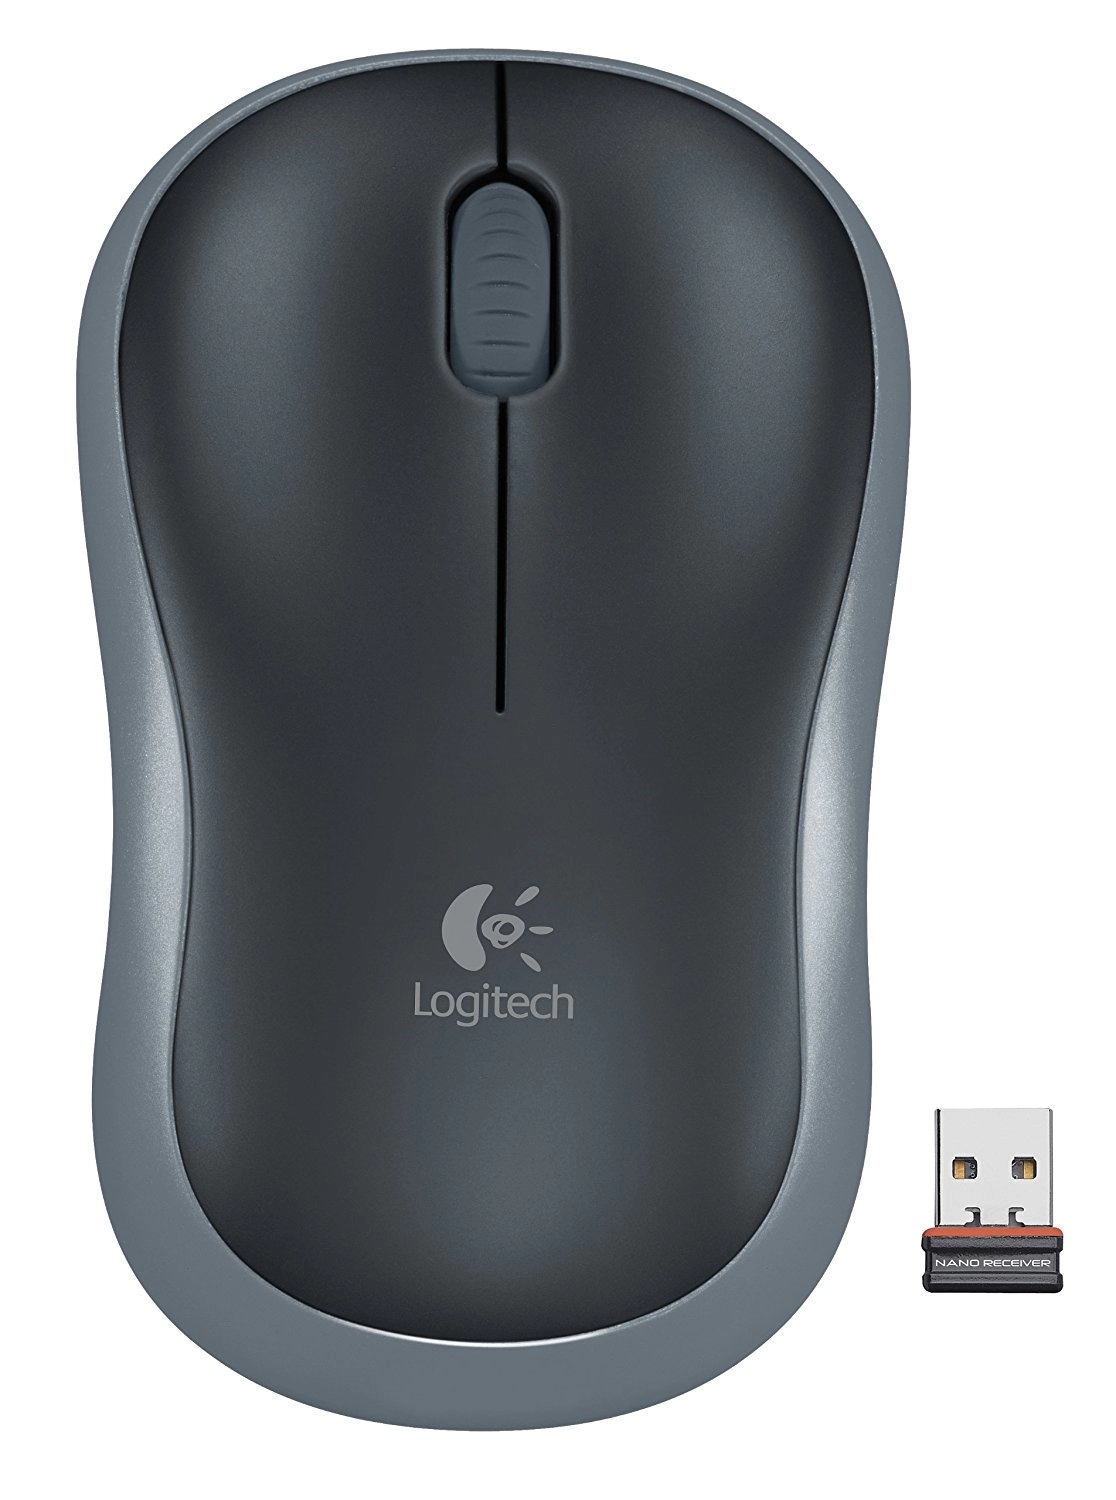 Logitech Wireless Mouse M185 Swift Grey, Optical Mouse for Notebooks, Nano receiver,  Grey/Black, Retail